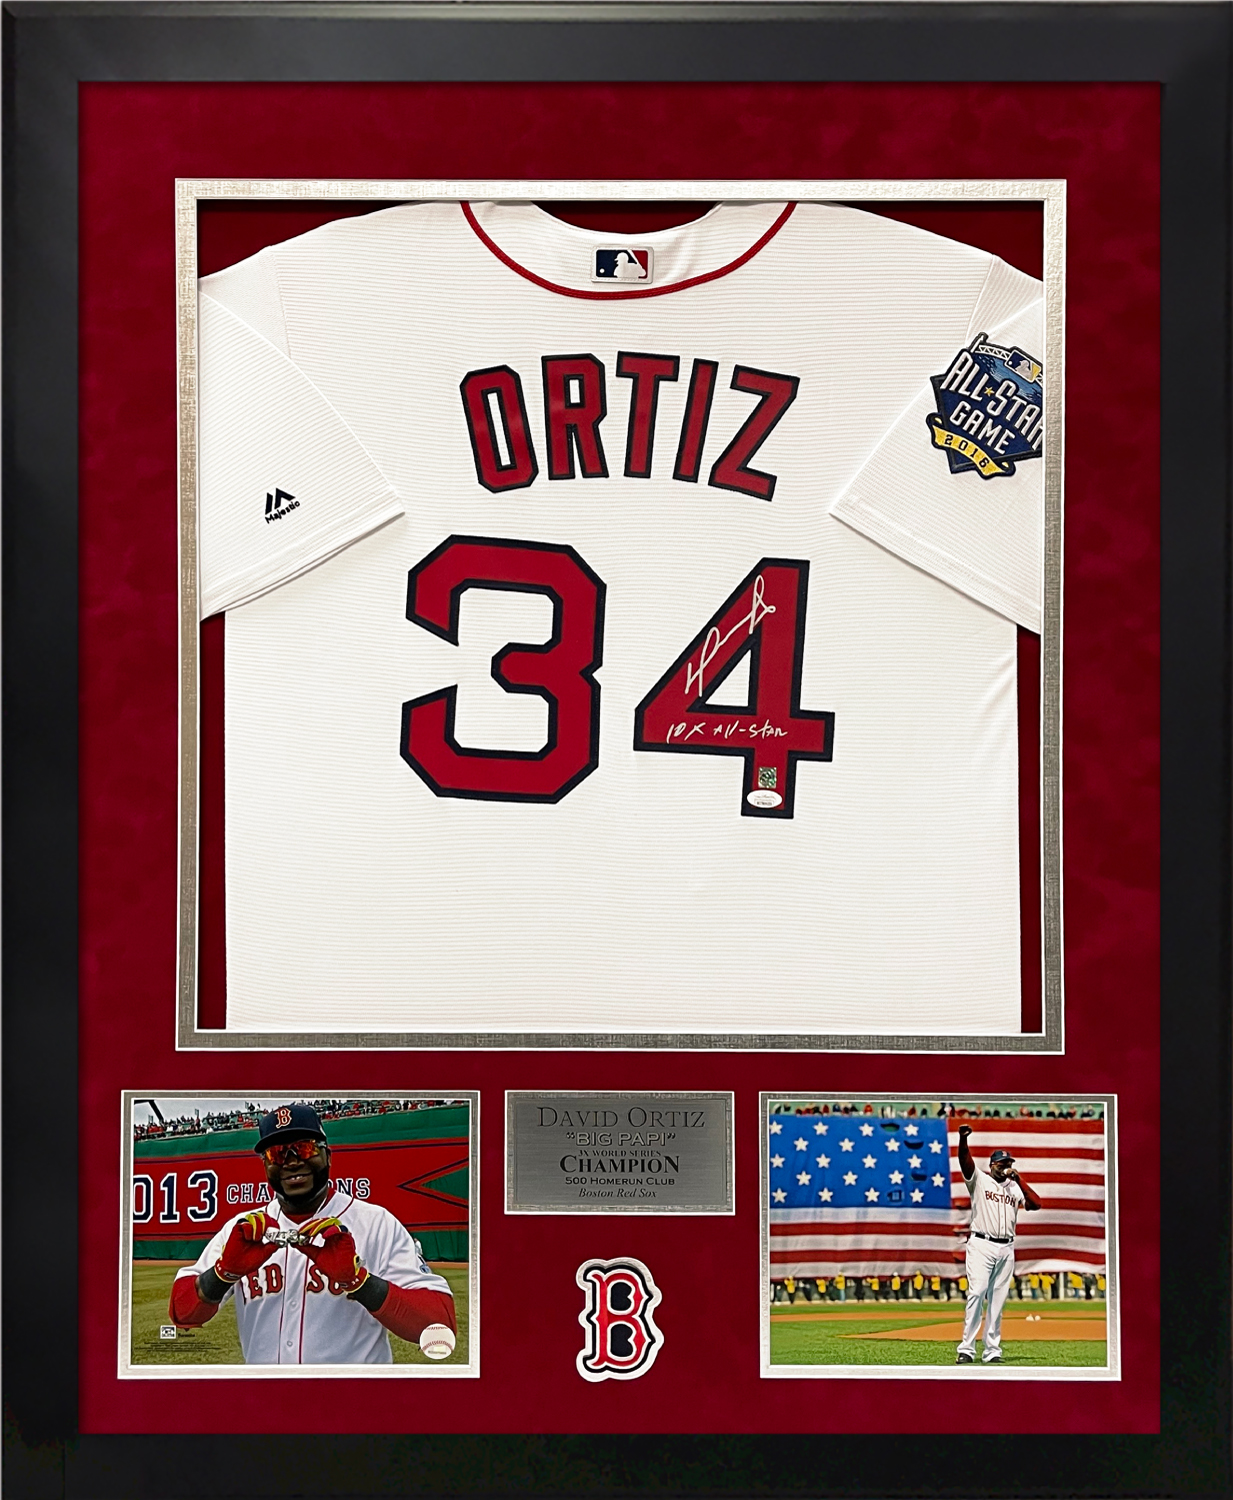 David Ortiz Autograph Jersey White All Star Game 2016 with